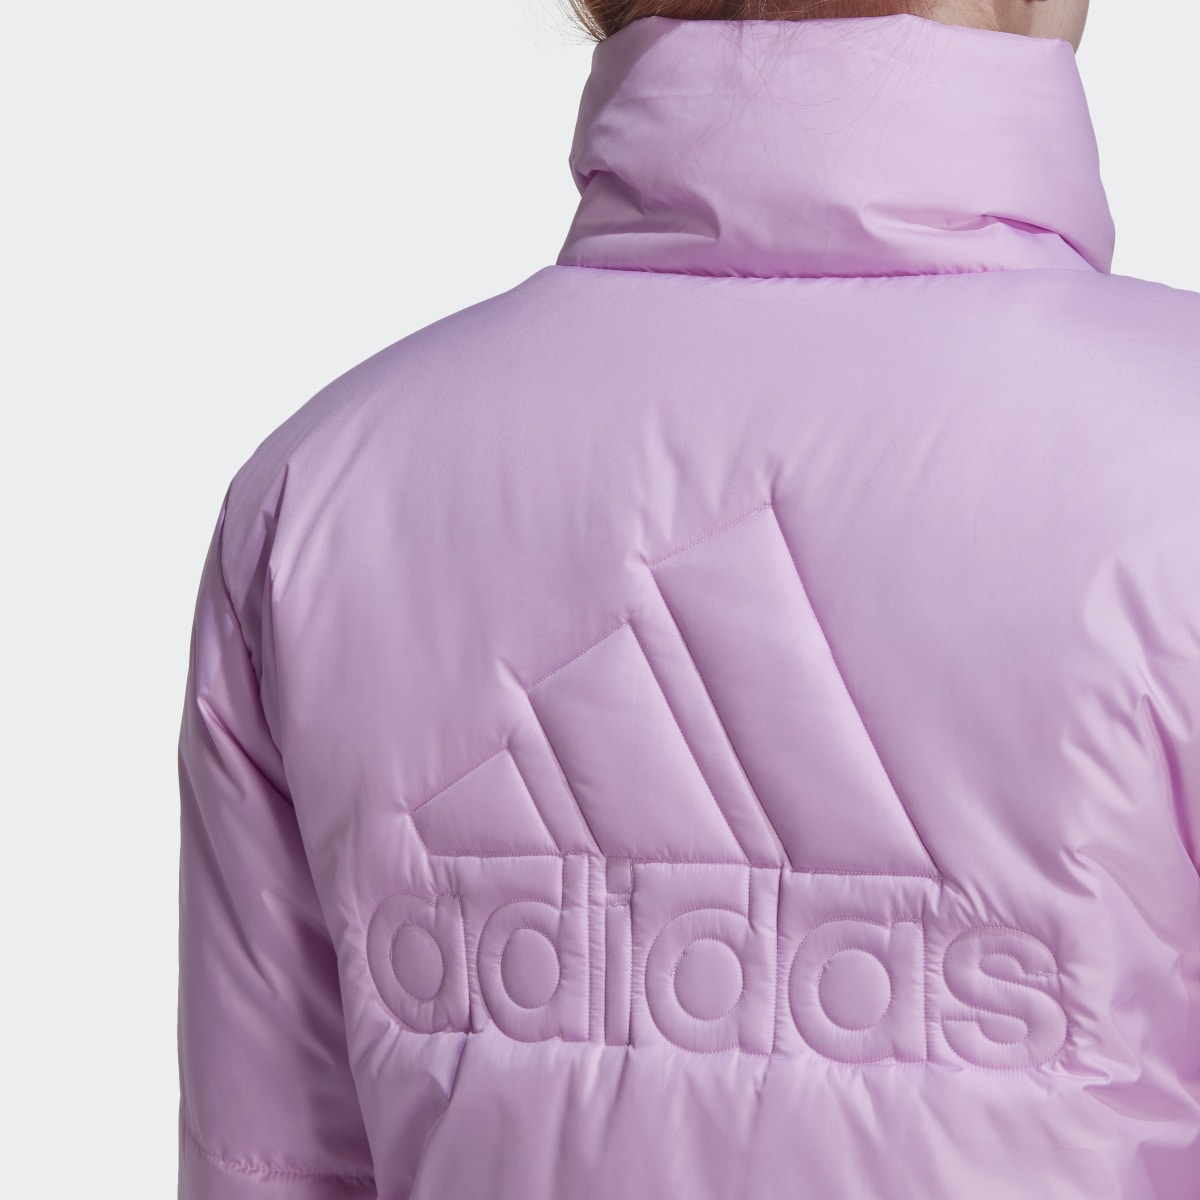 Adidas BSC Insulated Jacket. 7